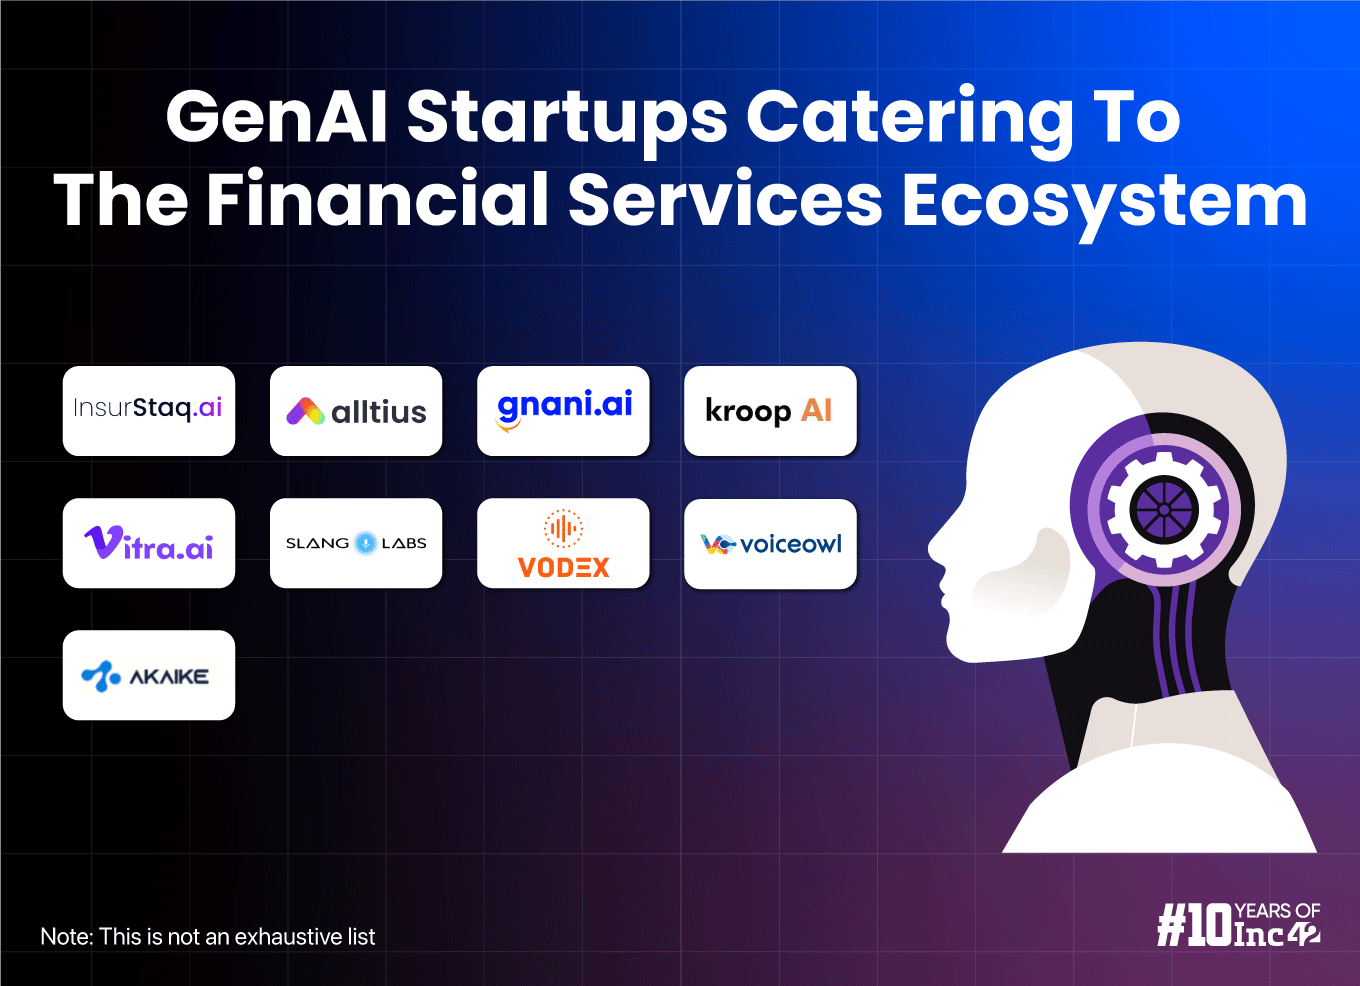 Currently, GenAI has found its prominence in fintech by enhancing the biggest challenge of customer support.